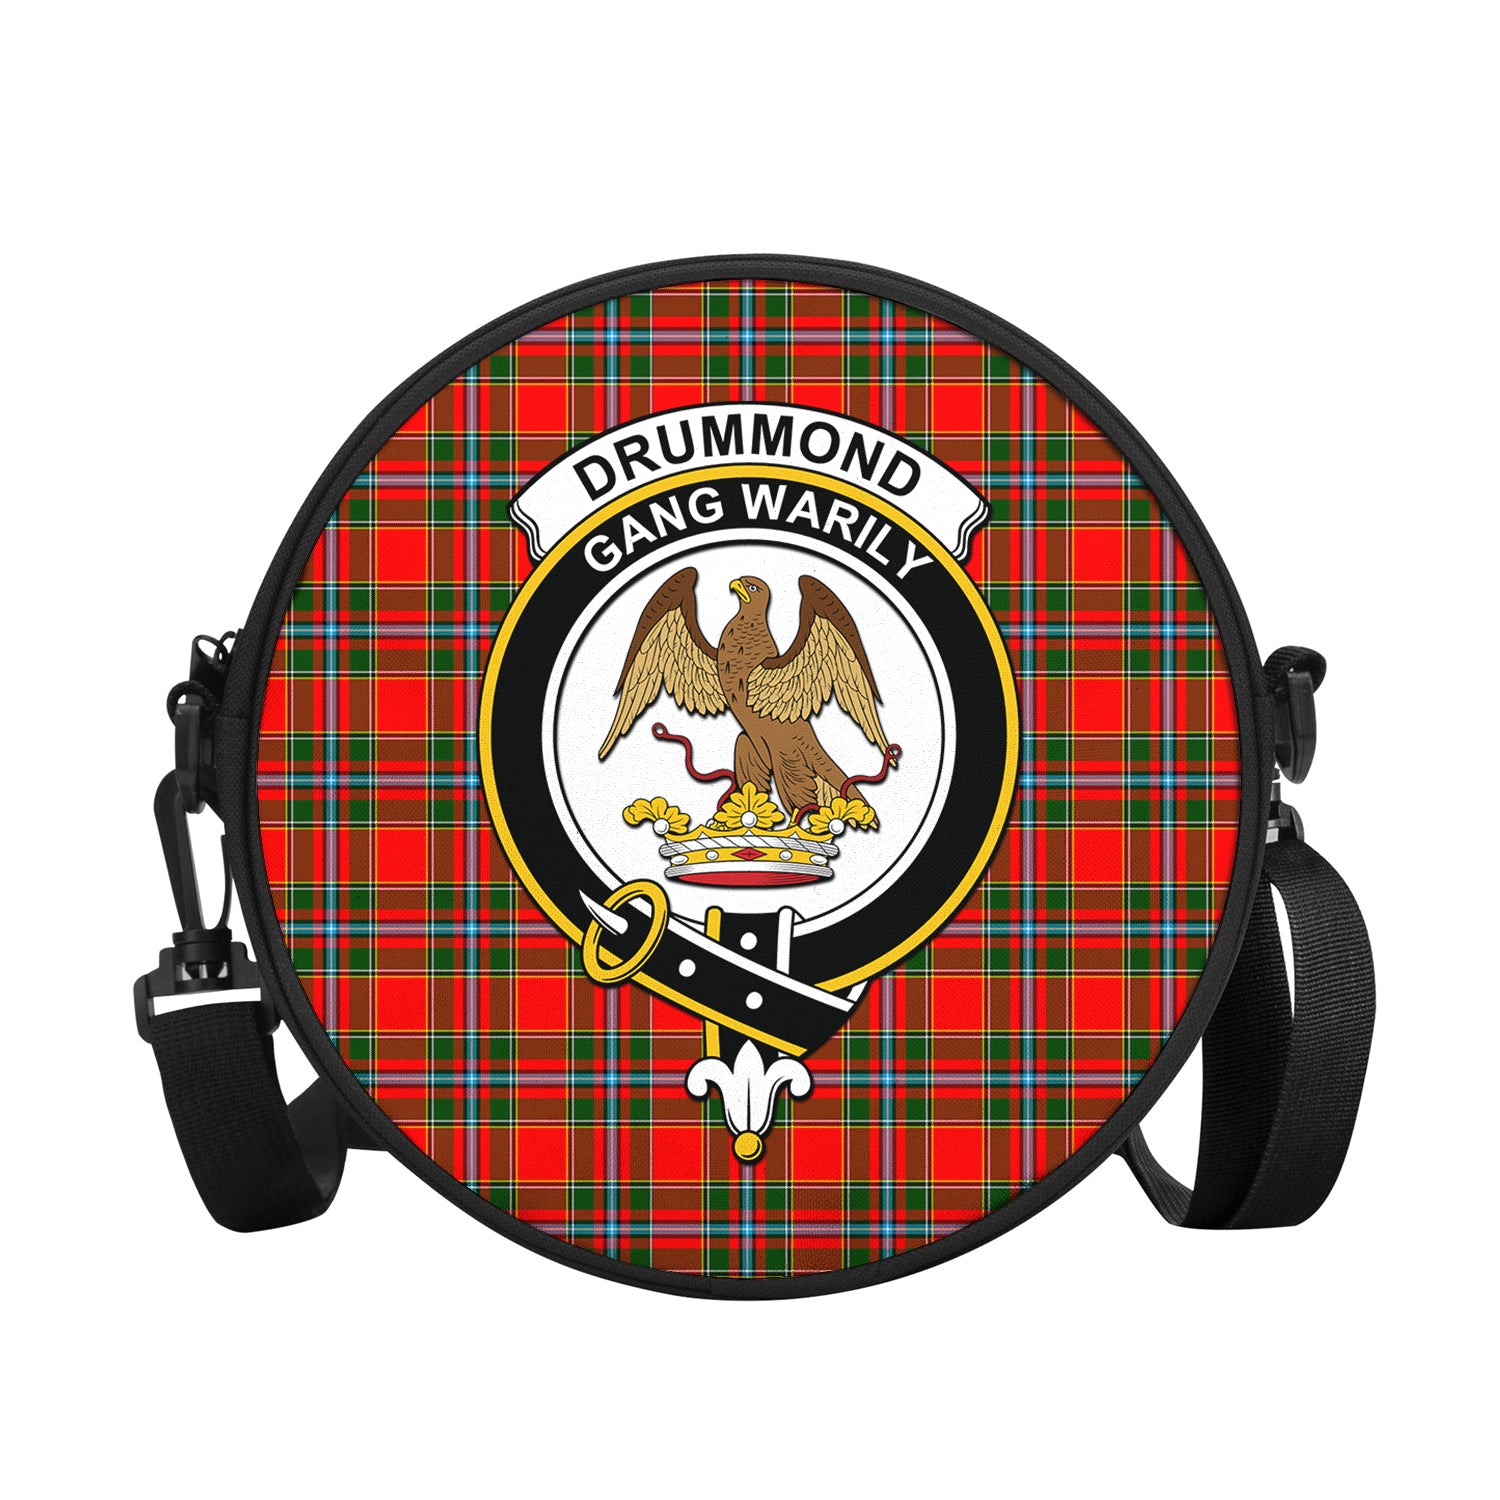 drummond-of-perth-tartan-round-satchel-bags-with-family-crest